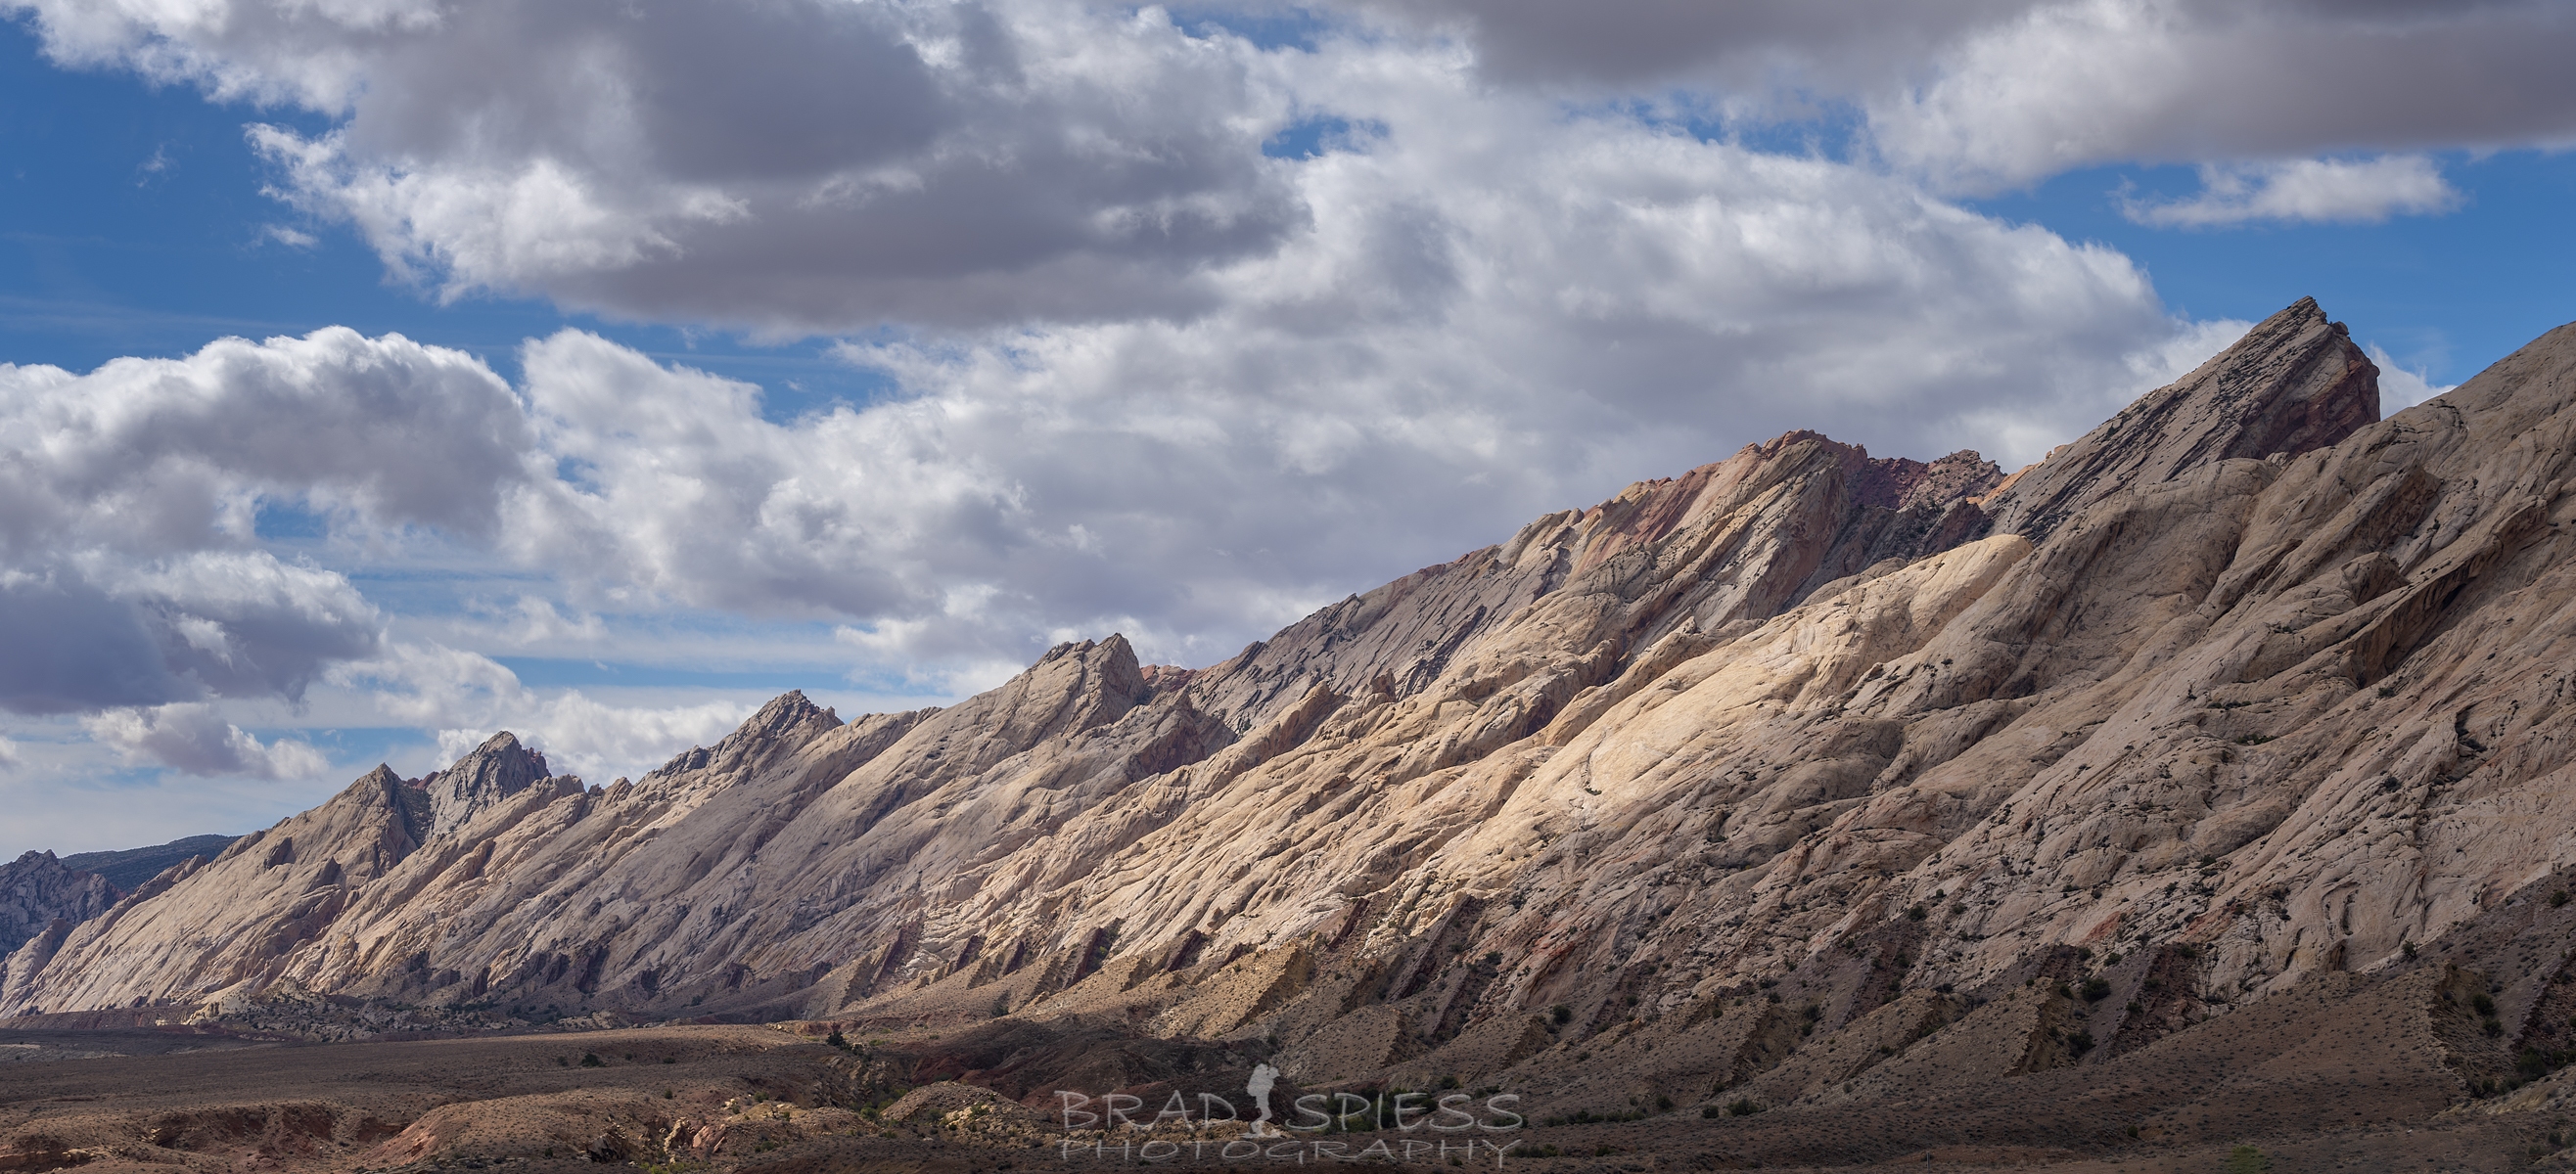 A Pano of the San Rafael Swell taken from a rest stop off of the highway on my way back to San Diego from Moab.